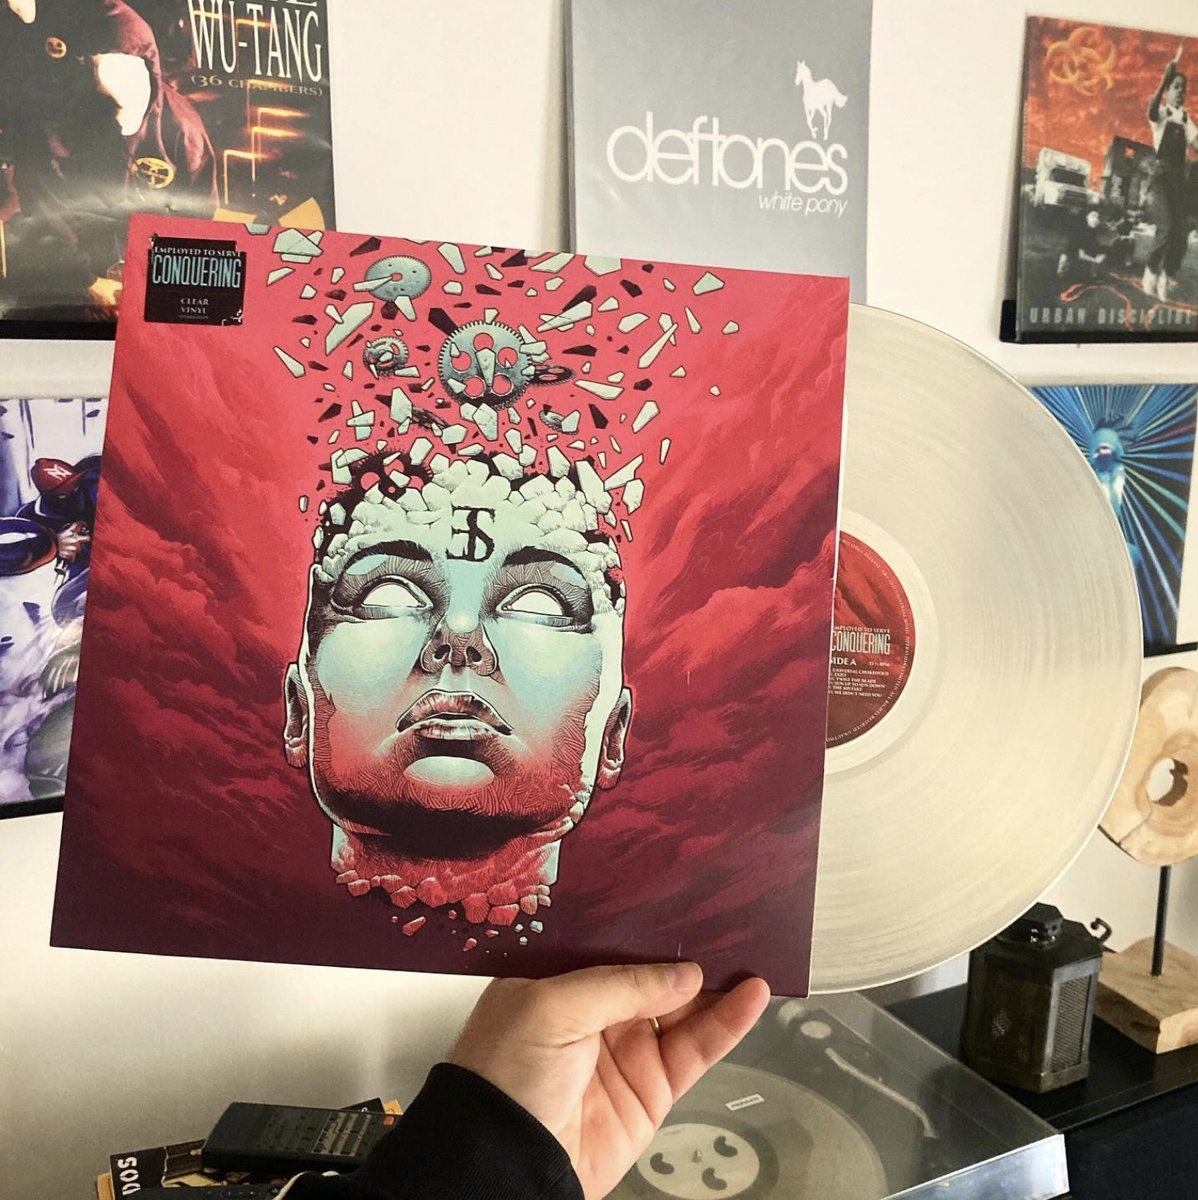 We love seeing your photos of our records! Vinyl and CDs of all of our albums are available here: employedtoserve.com Photo by: house_of_flies_music . . . #employedtoserve #metal #vinyl